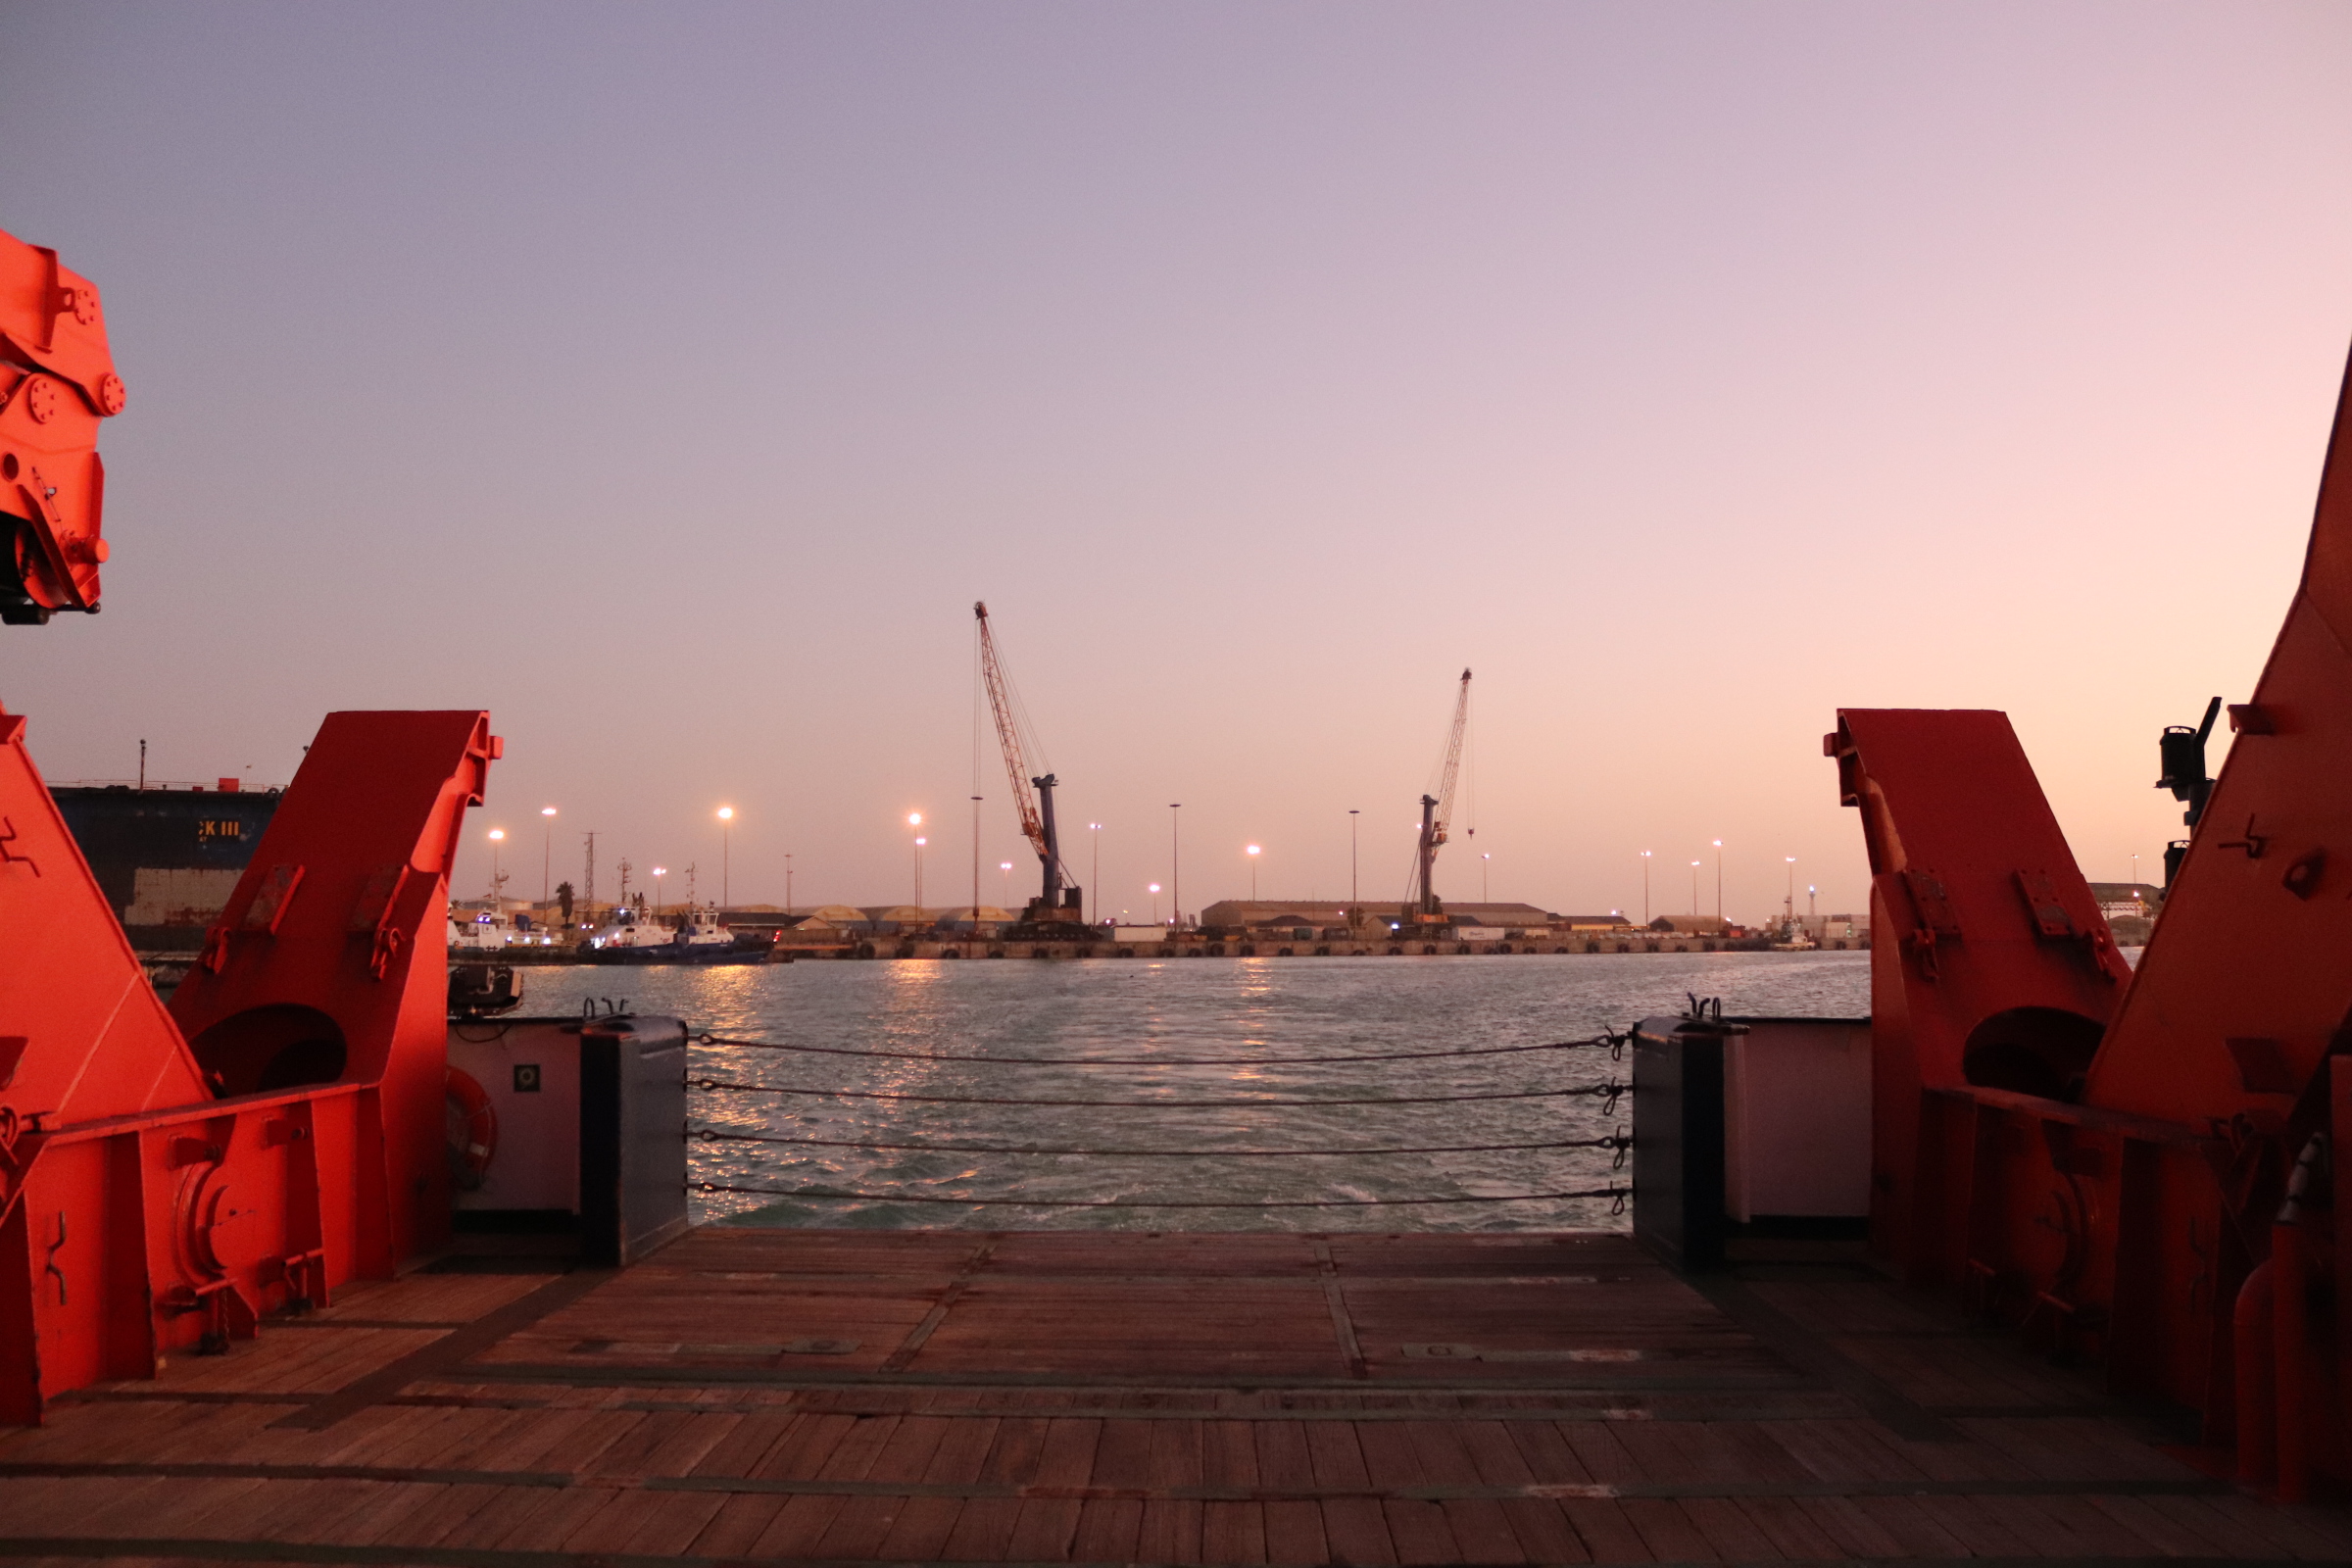 Stern view from Research Vessel Meteor during the departure from Walvis Bay.